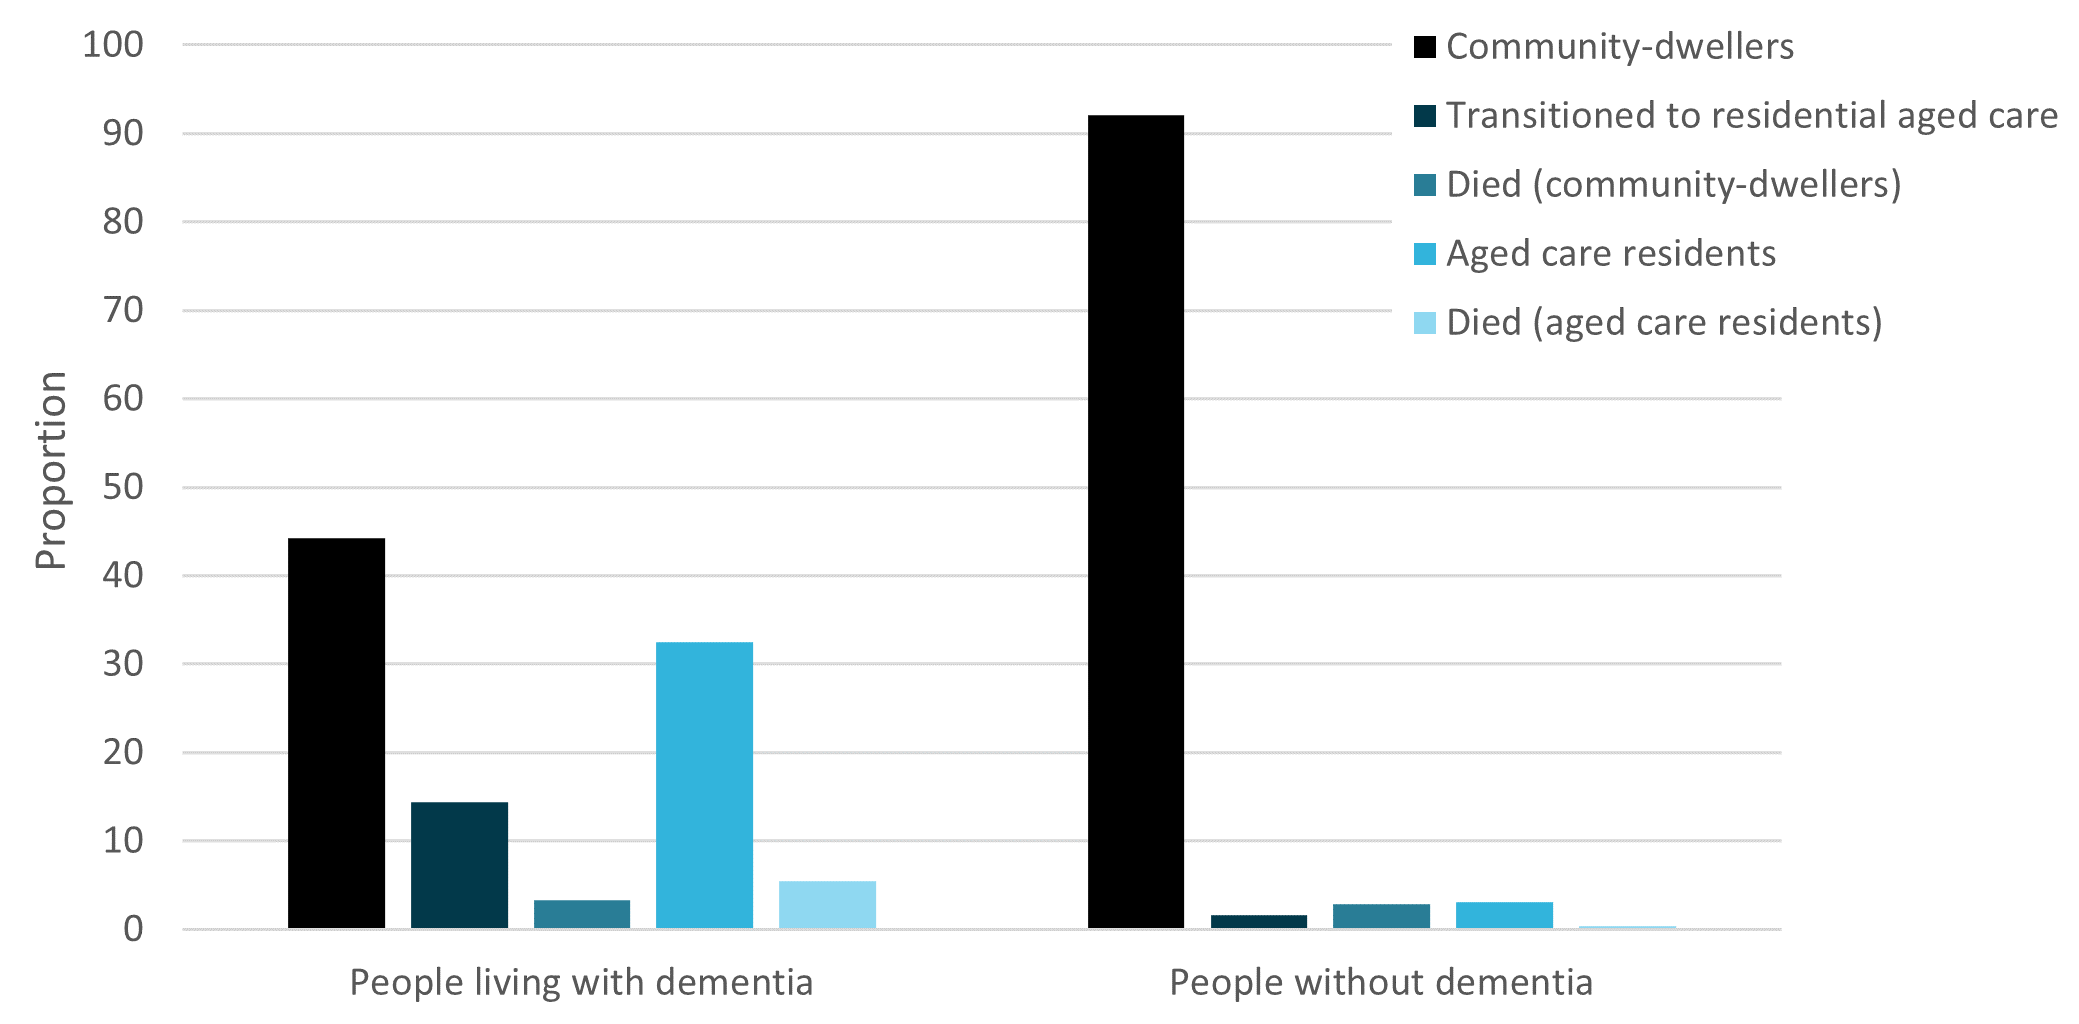 The figure is a bar chart and shows that while the vast majority (92%) of people without dementia continued to live in the community after their first hospitalisation, less than half of people living with dementia continued to live in the community (44%), with one third continuing to live in aged care (33%) and 14% of people moving from living in the community to living in aged care within 7-days of discharge.